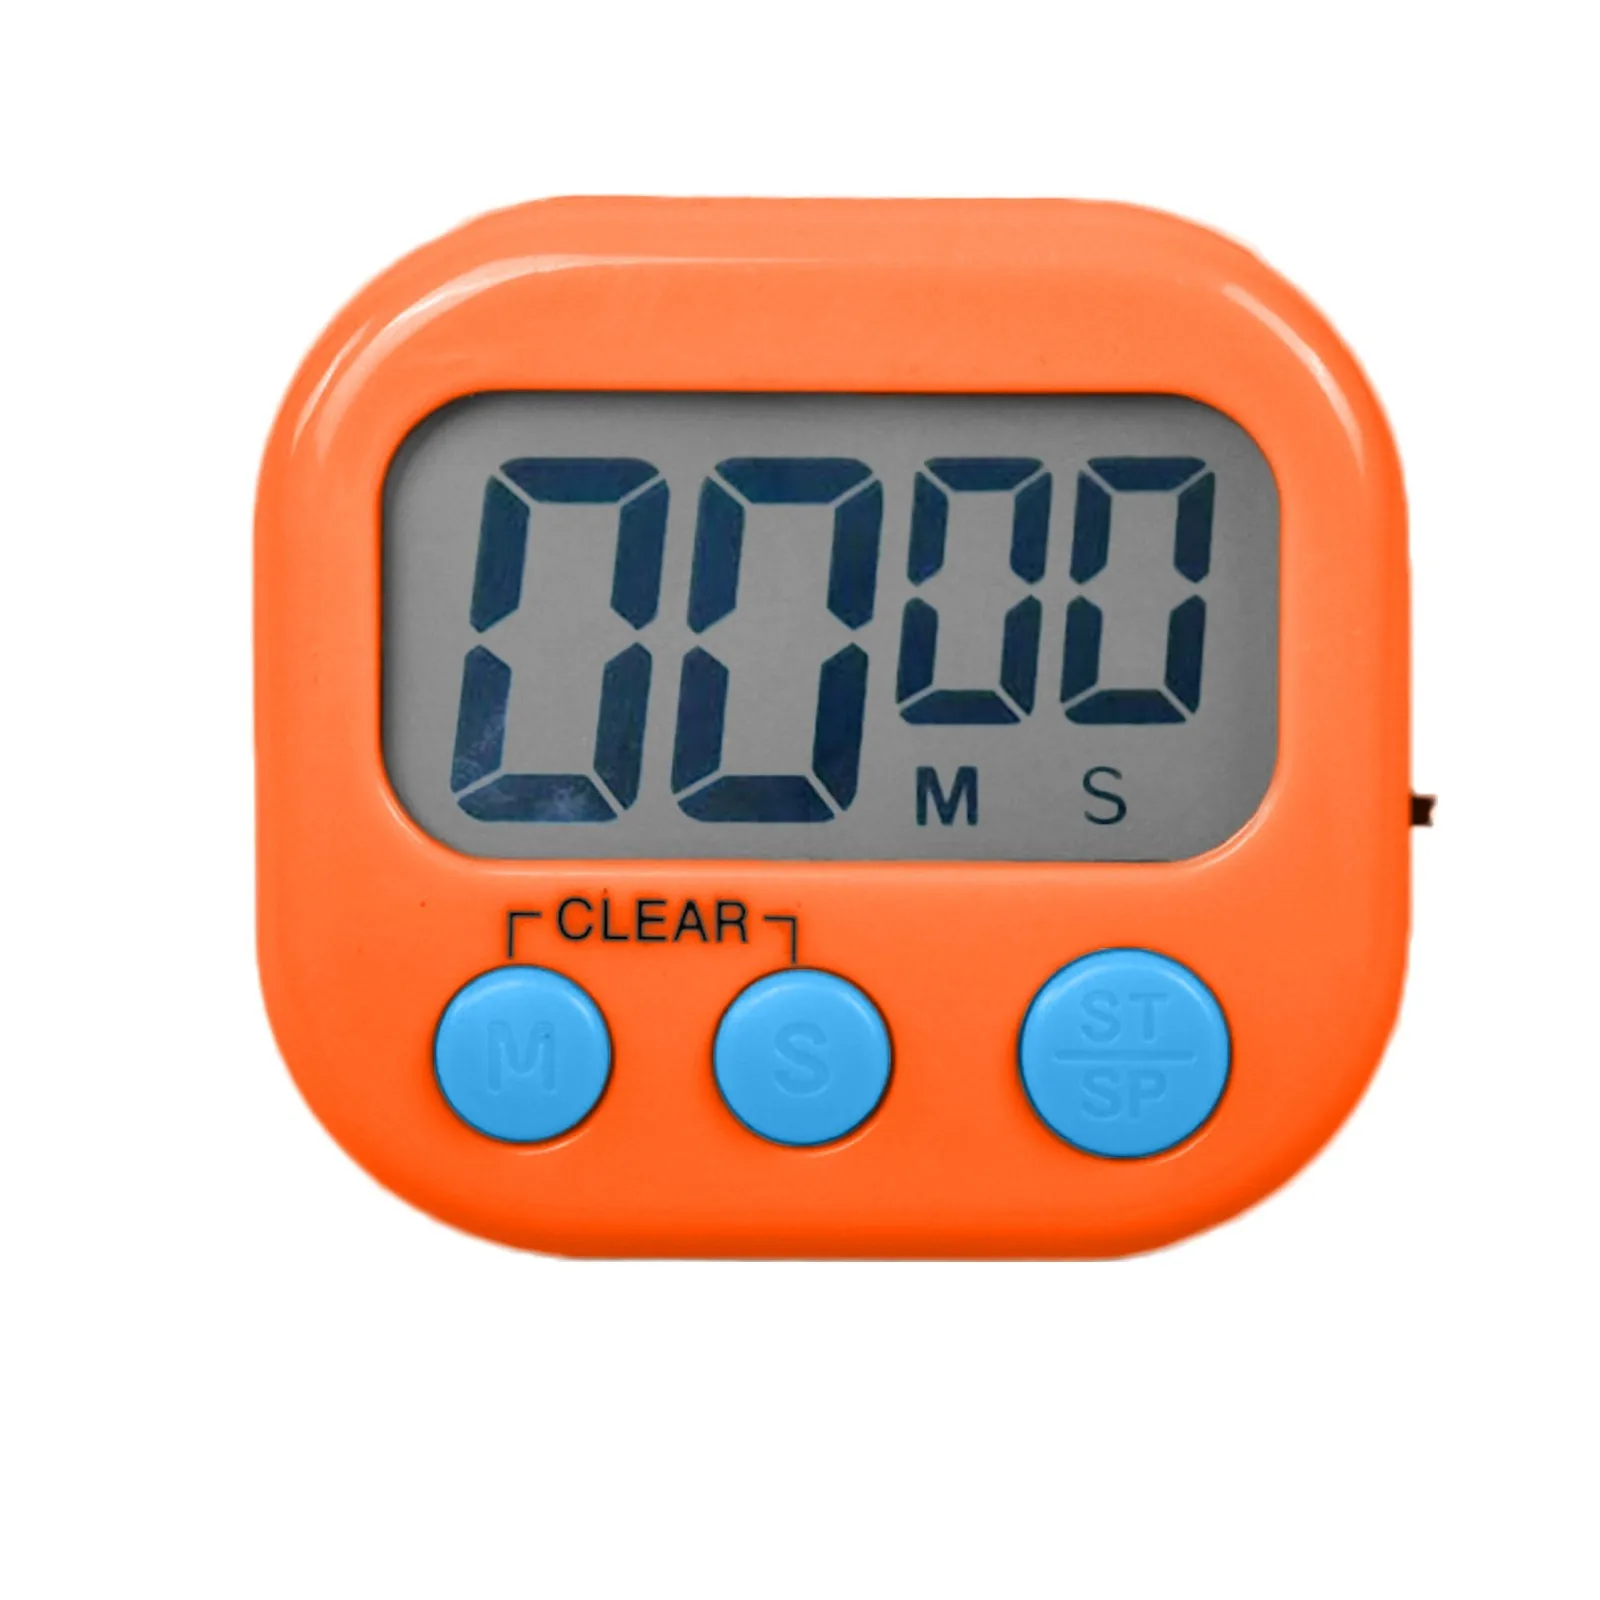 https://ae01.alicdn.com/kf/S2a28fd6af95a48529bd4d2f03427ecd3g/Digital-Kitchen-Lcd-Timer-Count-Up-Countdown-Cooking-Timer-Tools-Classroom-Timers-For-Teachers-Kids-Home.jpg